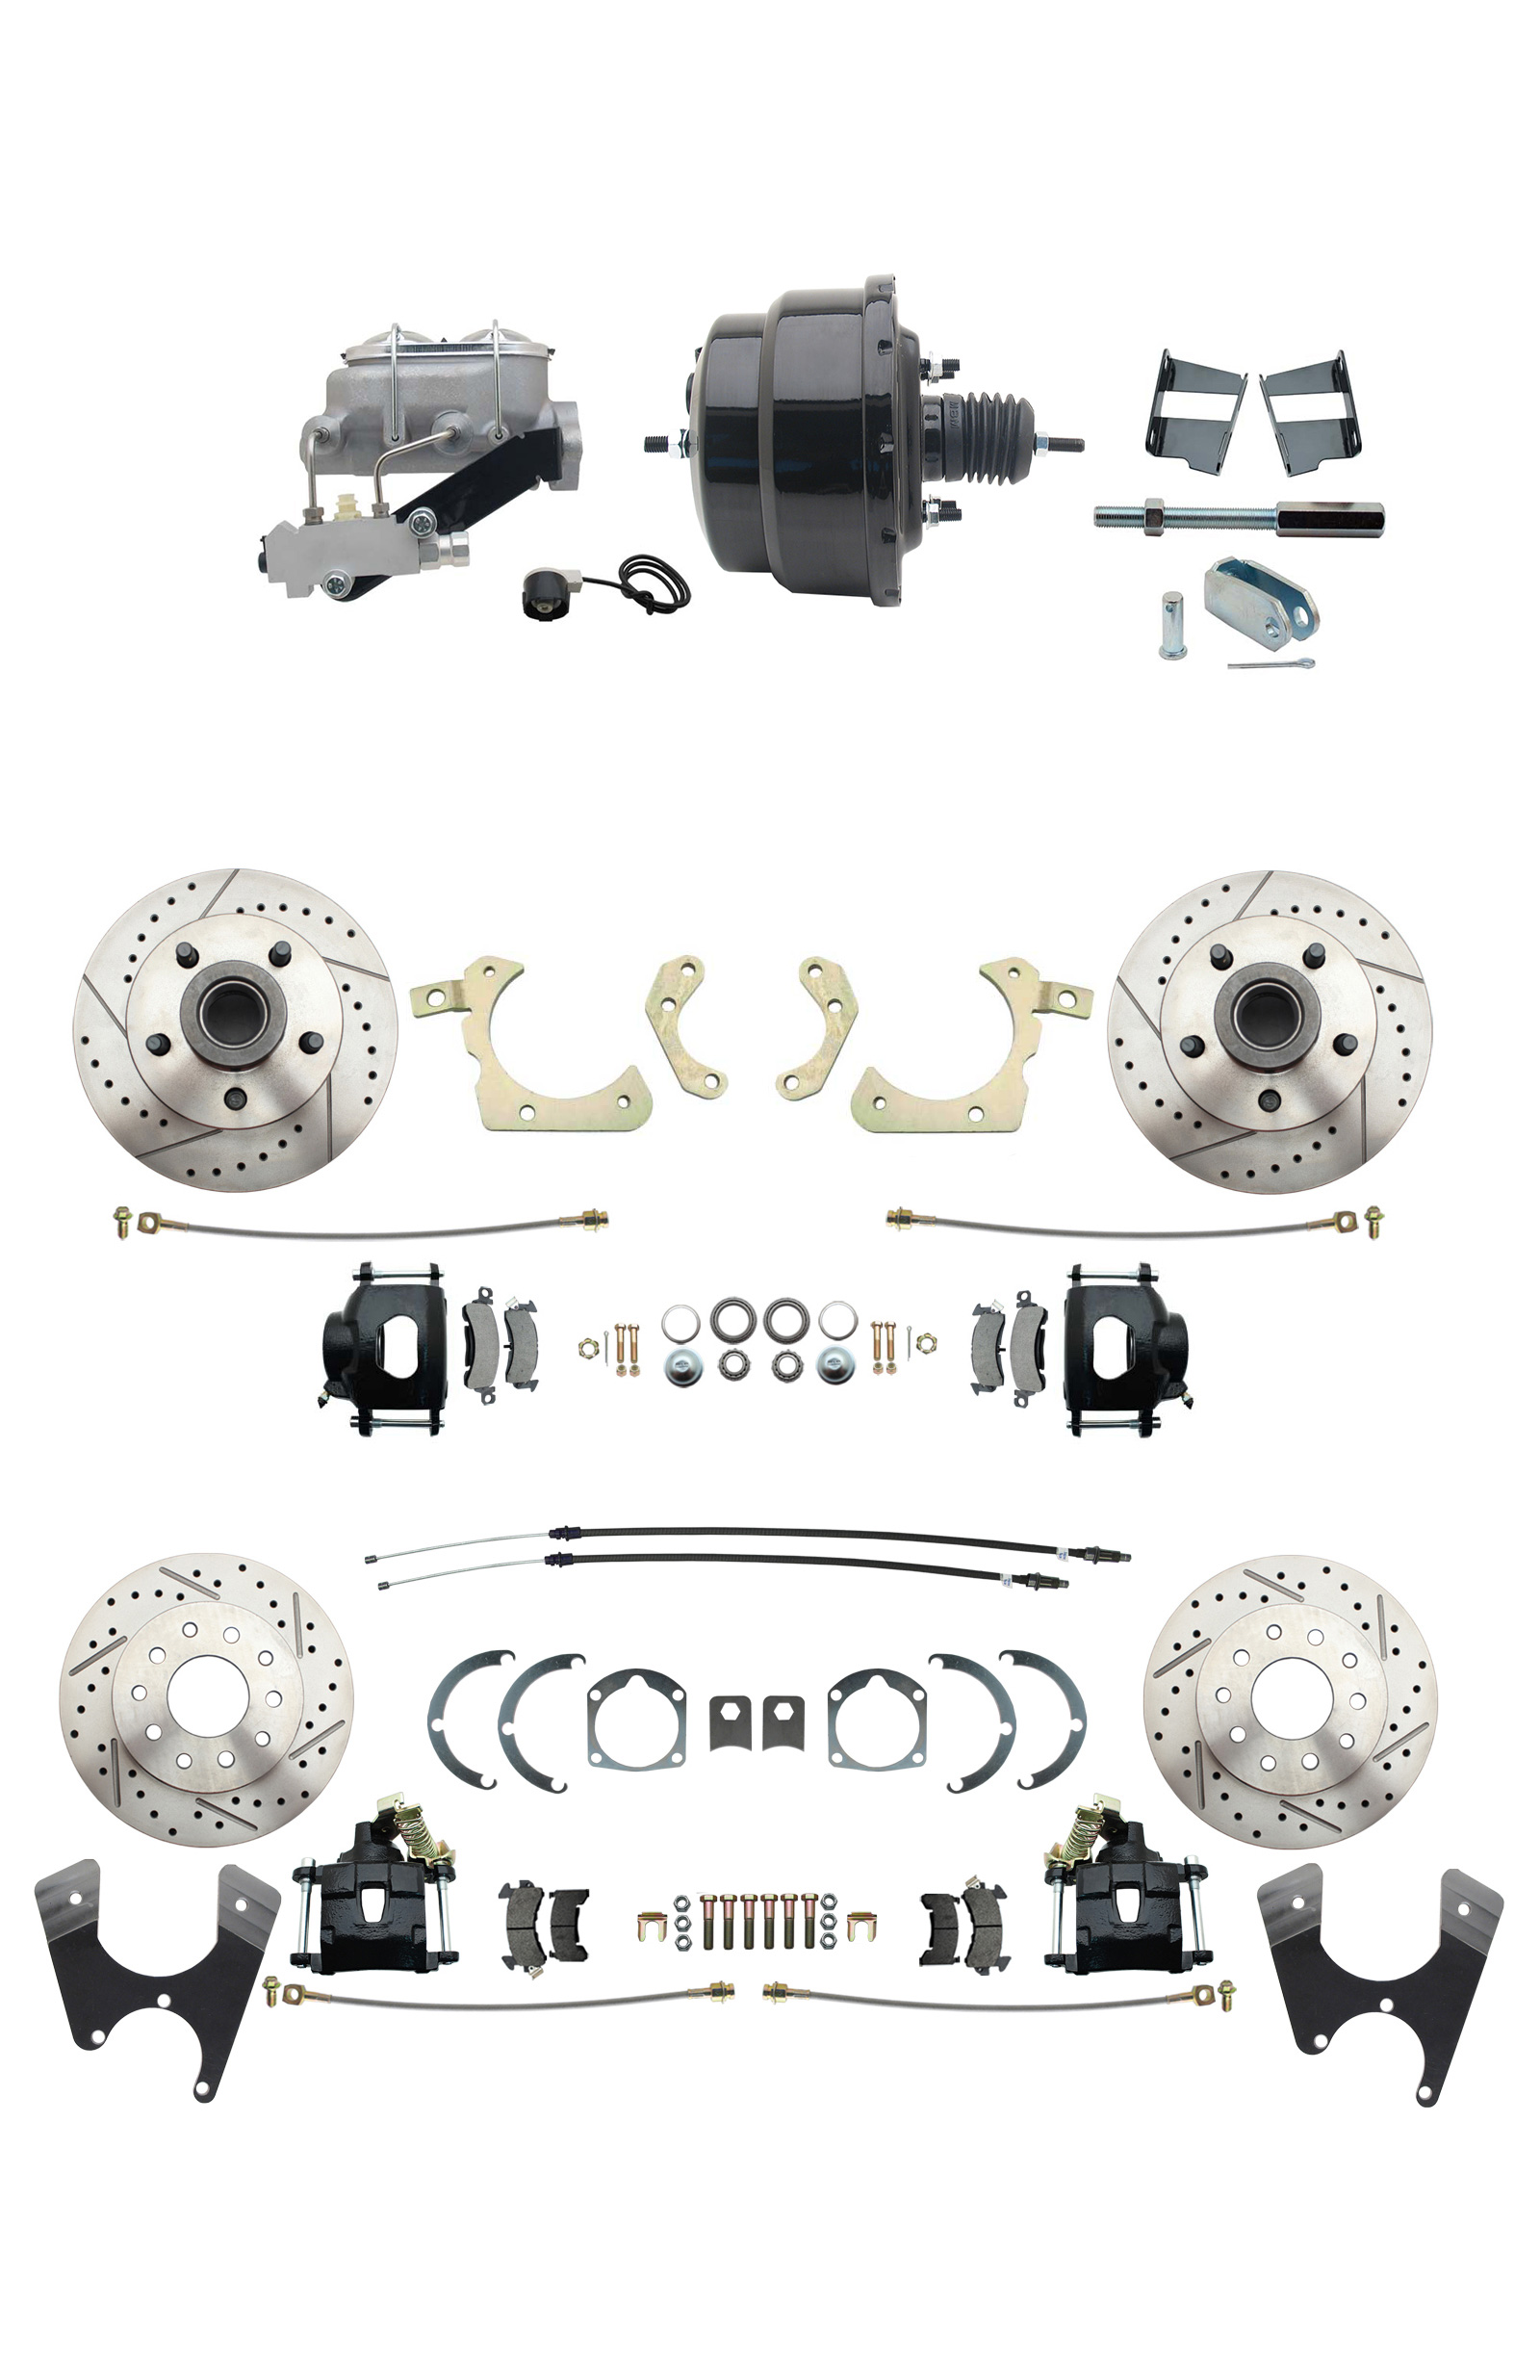 1959-1964 GM Full Size Front & Rear Power Disc Brake Kit Black Powder Coated Calipers Drilled/Slotted Rotors (Impala, Bel Air, Biscayne) & 8 Dual Powder Coated Black Booster Conversion Kit W/ Aluminum Master Cylinder Le